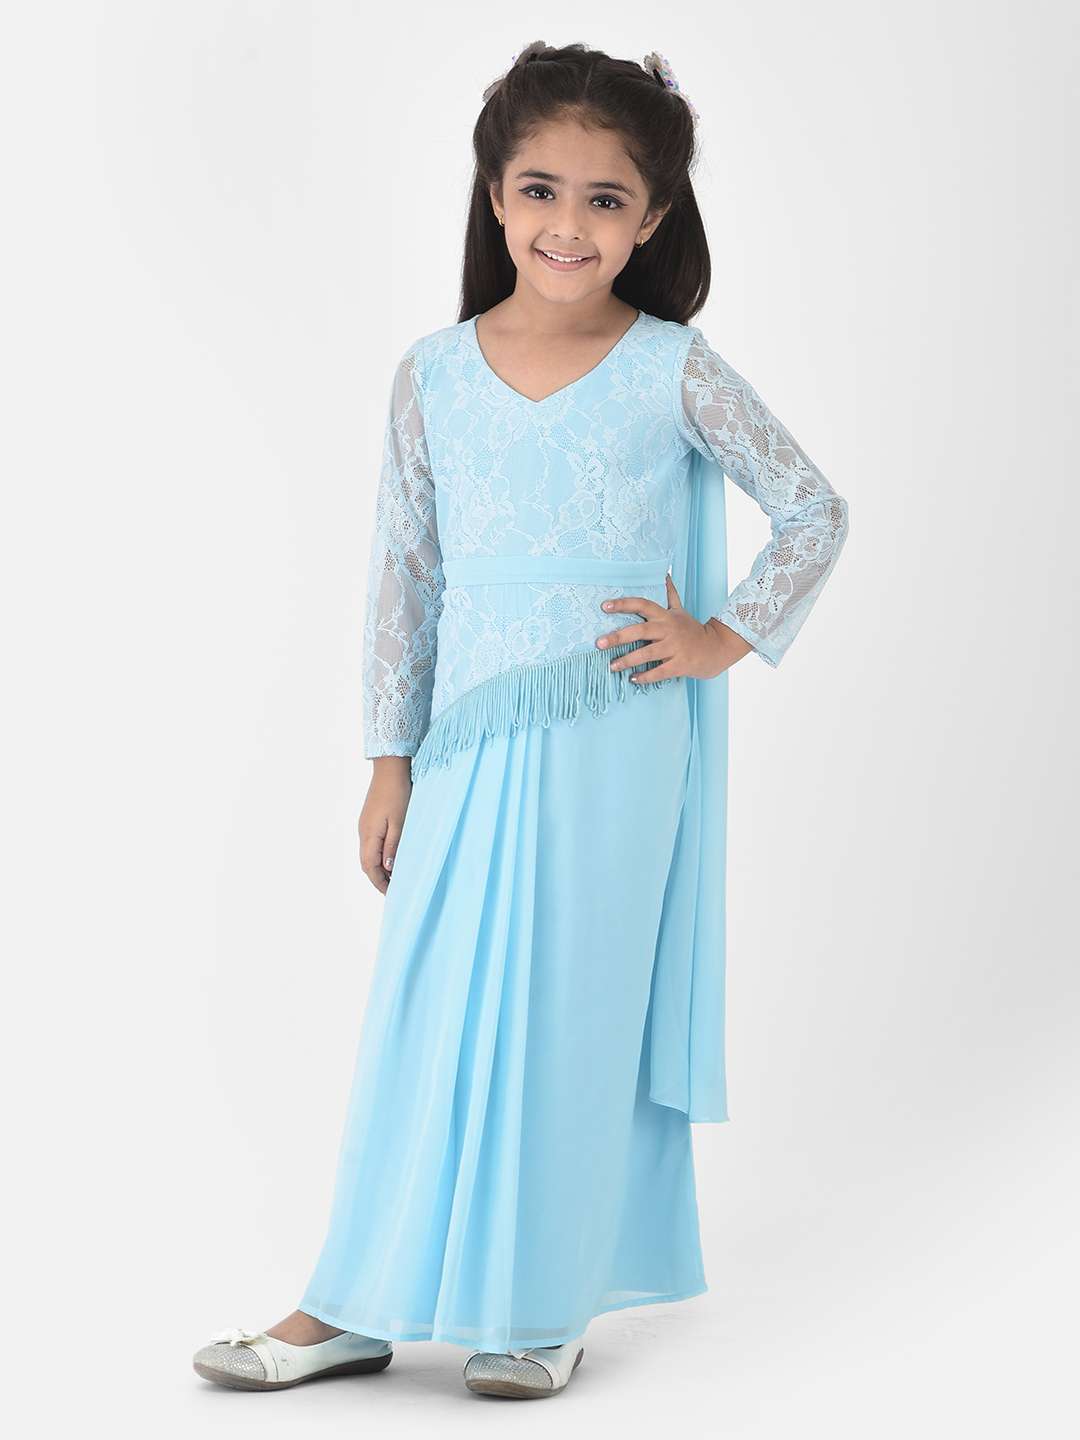 Gown Stitch Girls Party Wear Frocks, Size: 24-38 at Rs 1249/piece in Surat